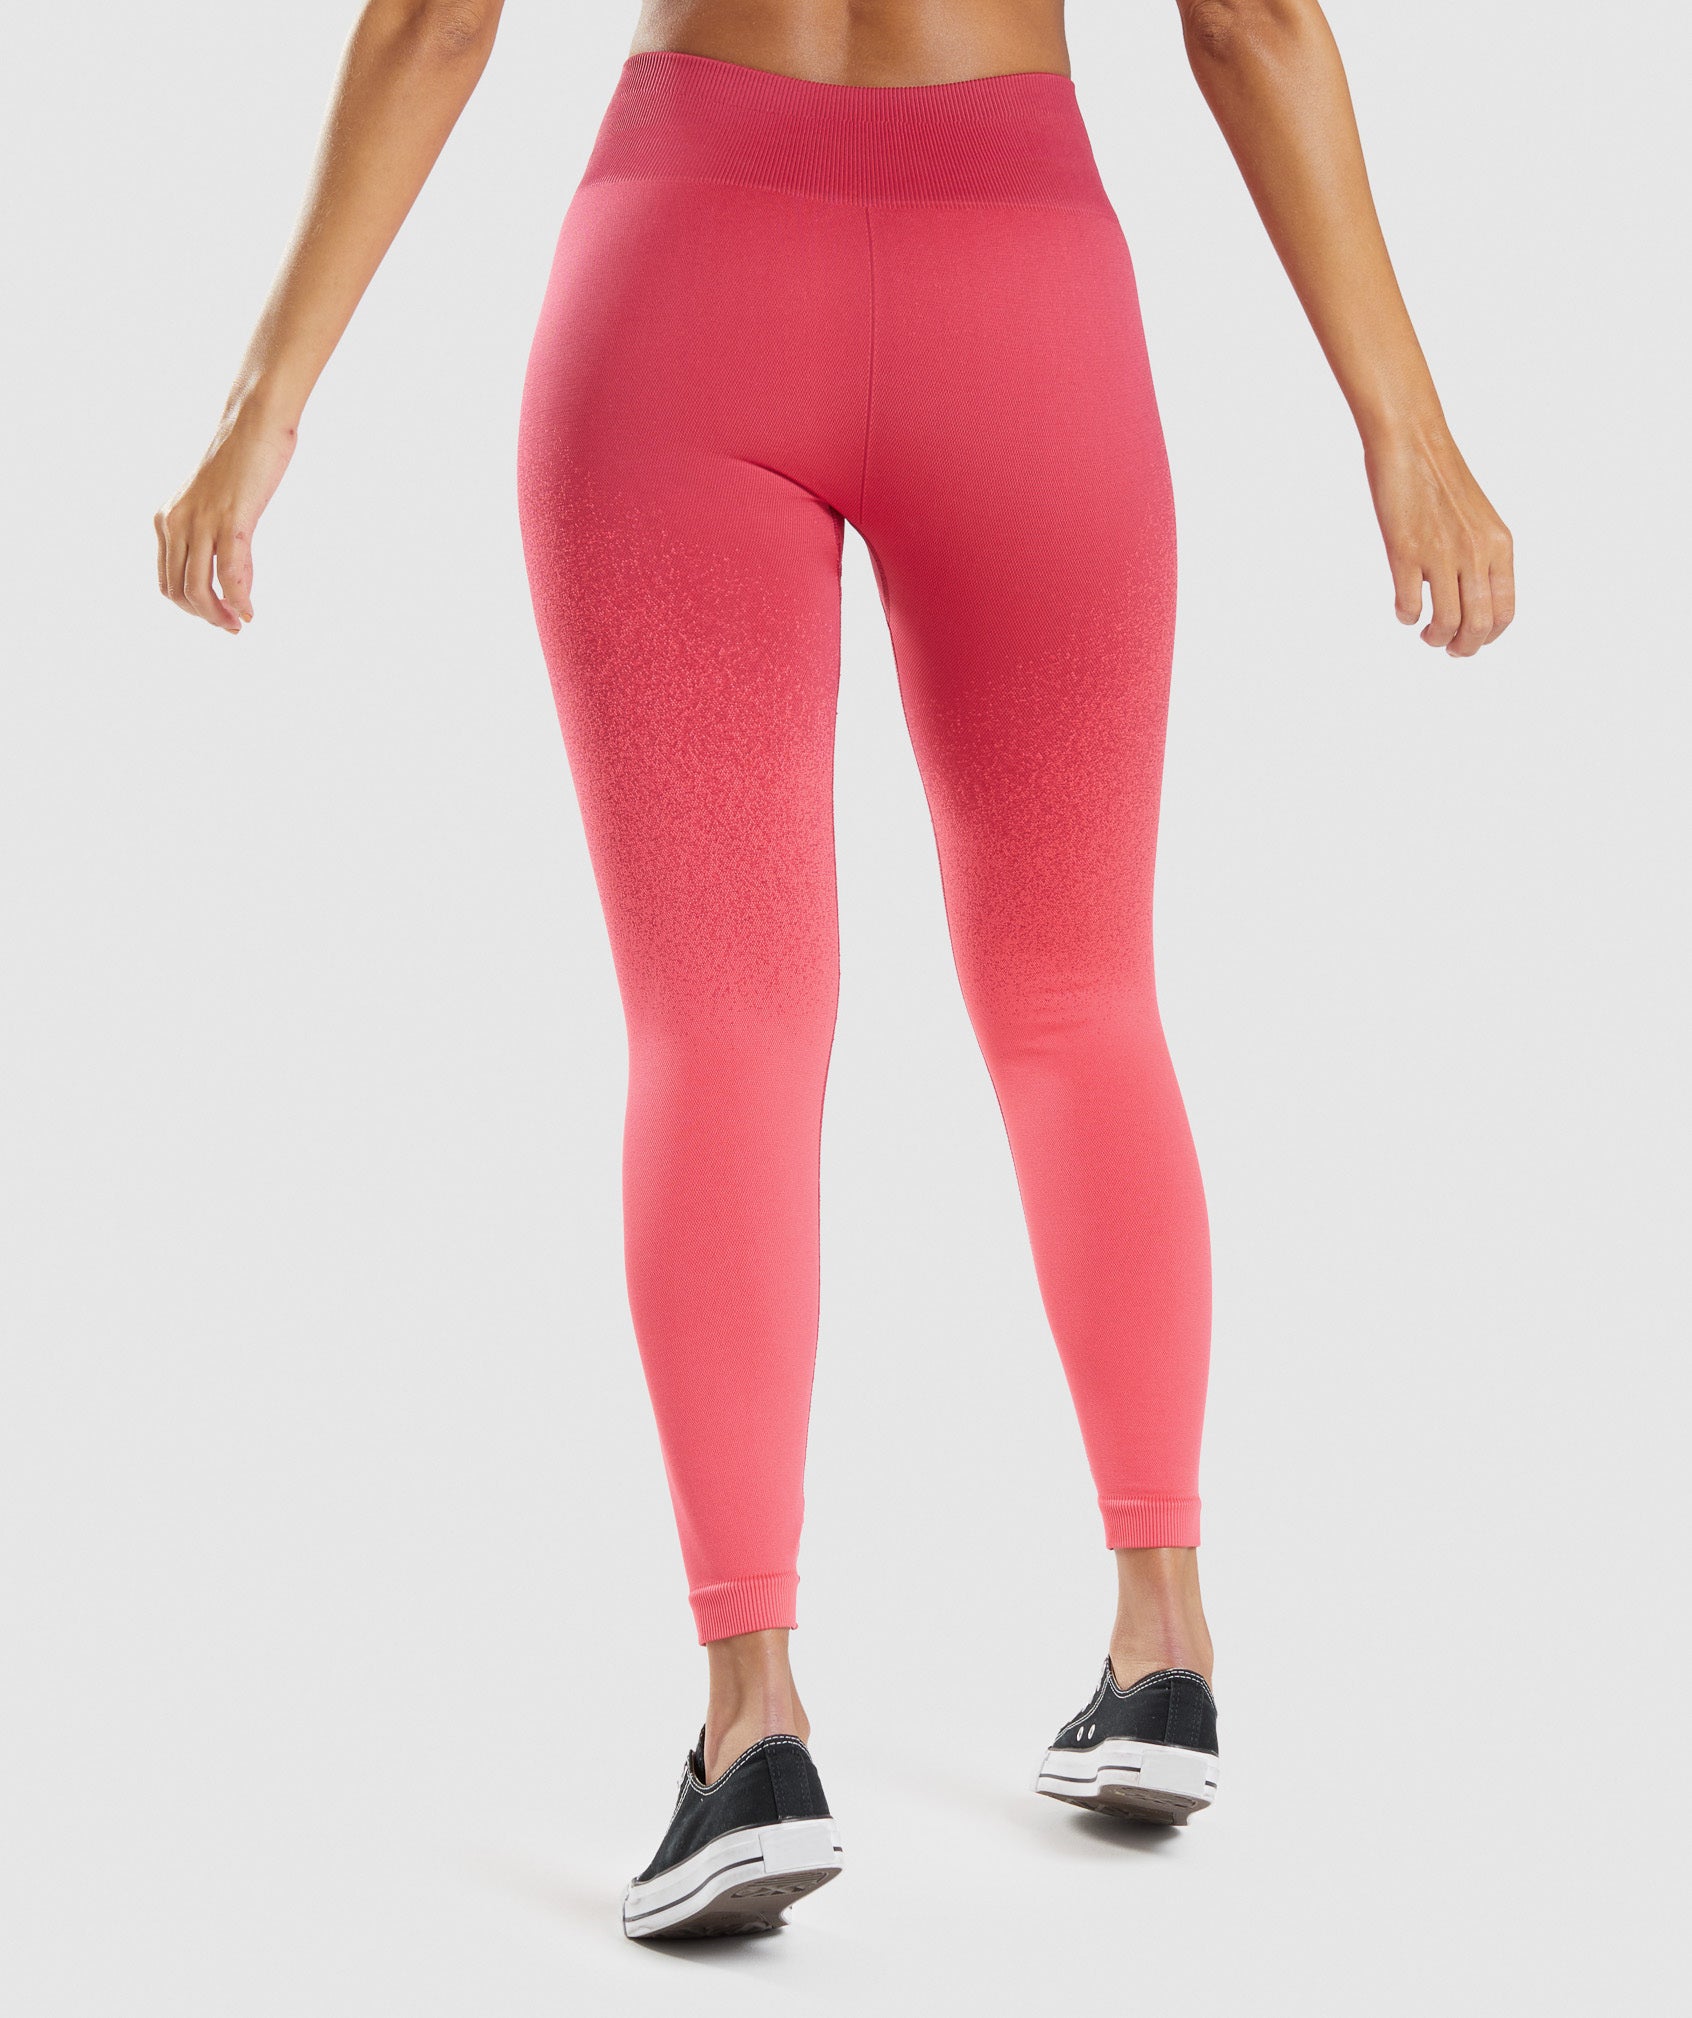 Adapt Ombre Seamless Leggings in Pink/Red - view 3